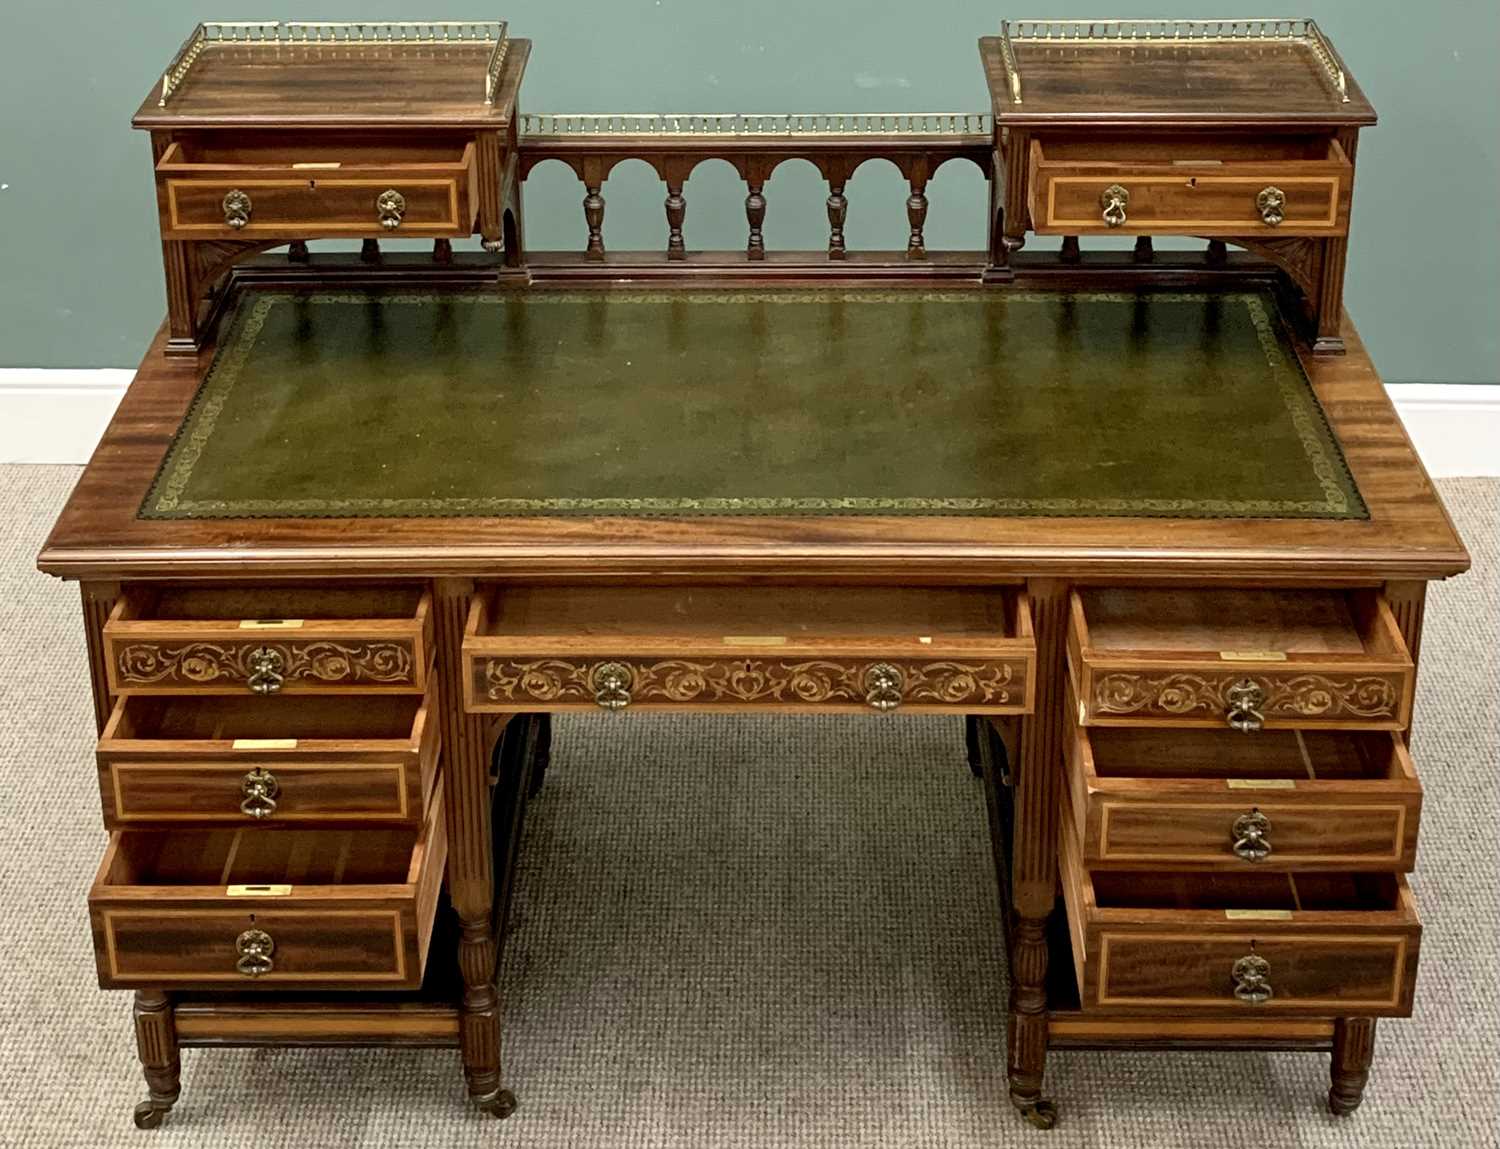 MAHOGANY DESK - fine twin pedestal example with railback and elevated drawers, inlaid detail - Image 2 of 5